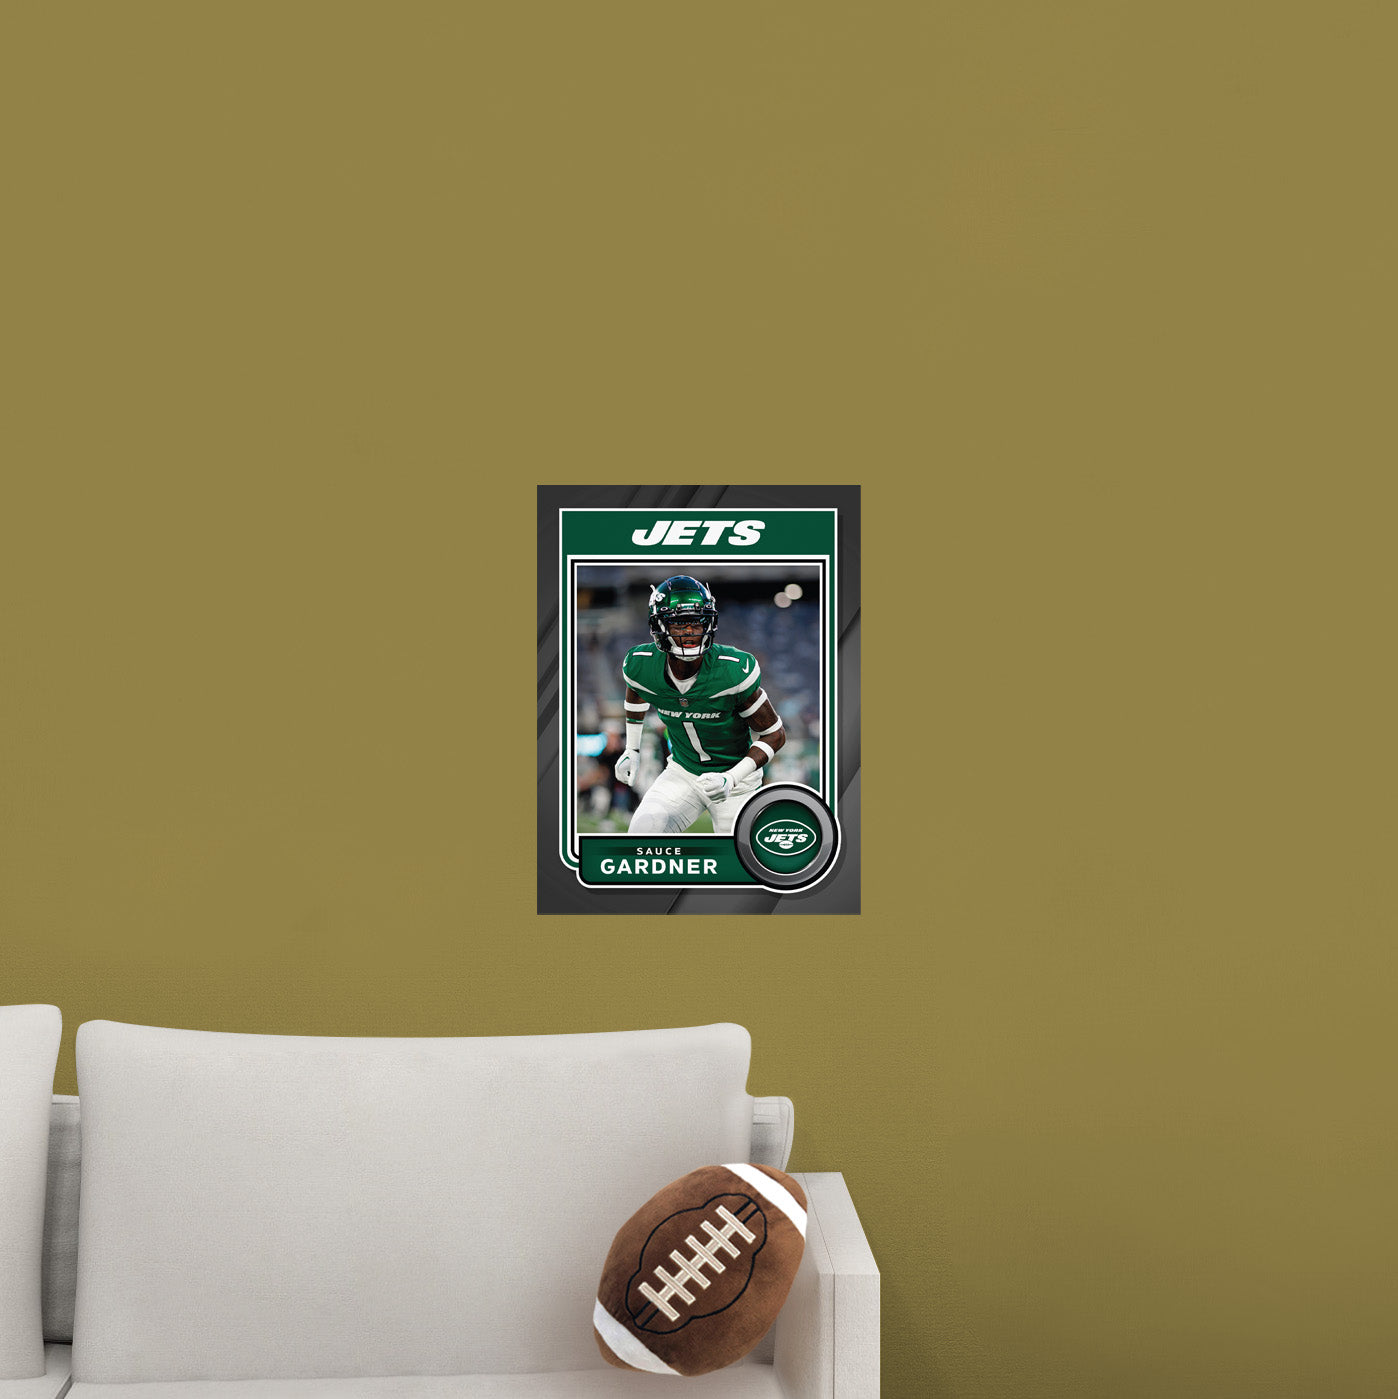 New York Jets: Sauce Gardner Poster - Officially Licensed NFL Removable Adhesive Decal